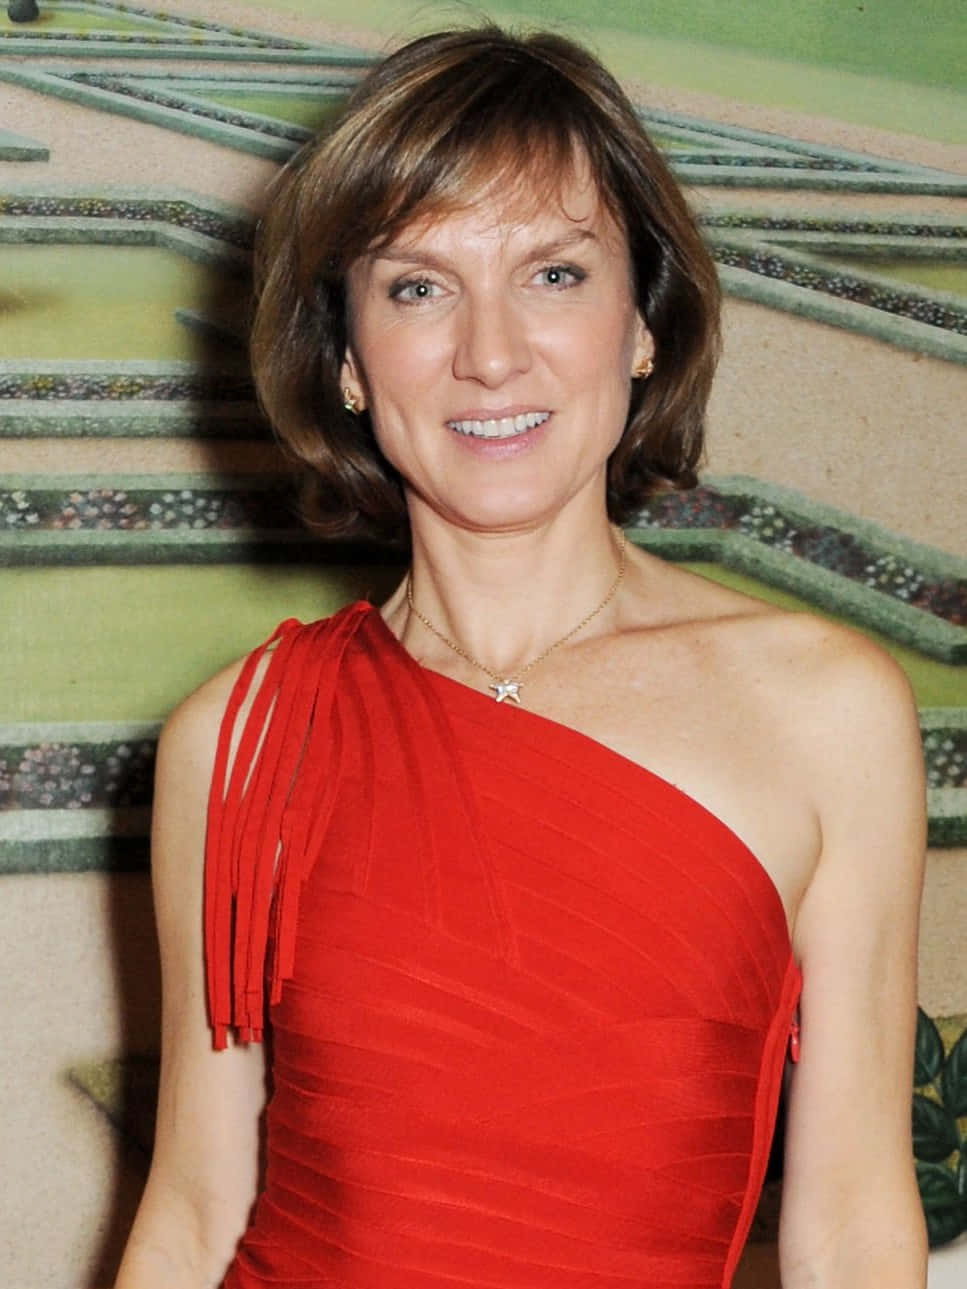 Fiona Bruce posing elegantly in a classy outfit Wallpaper